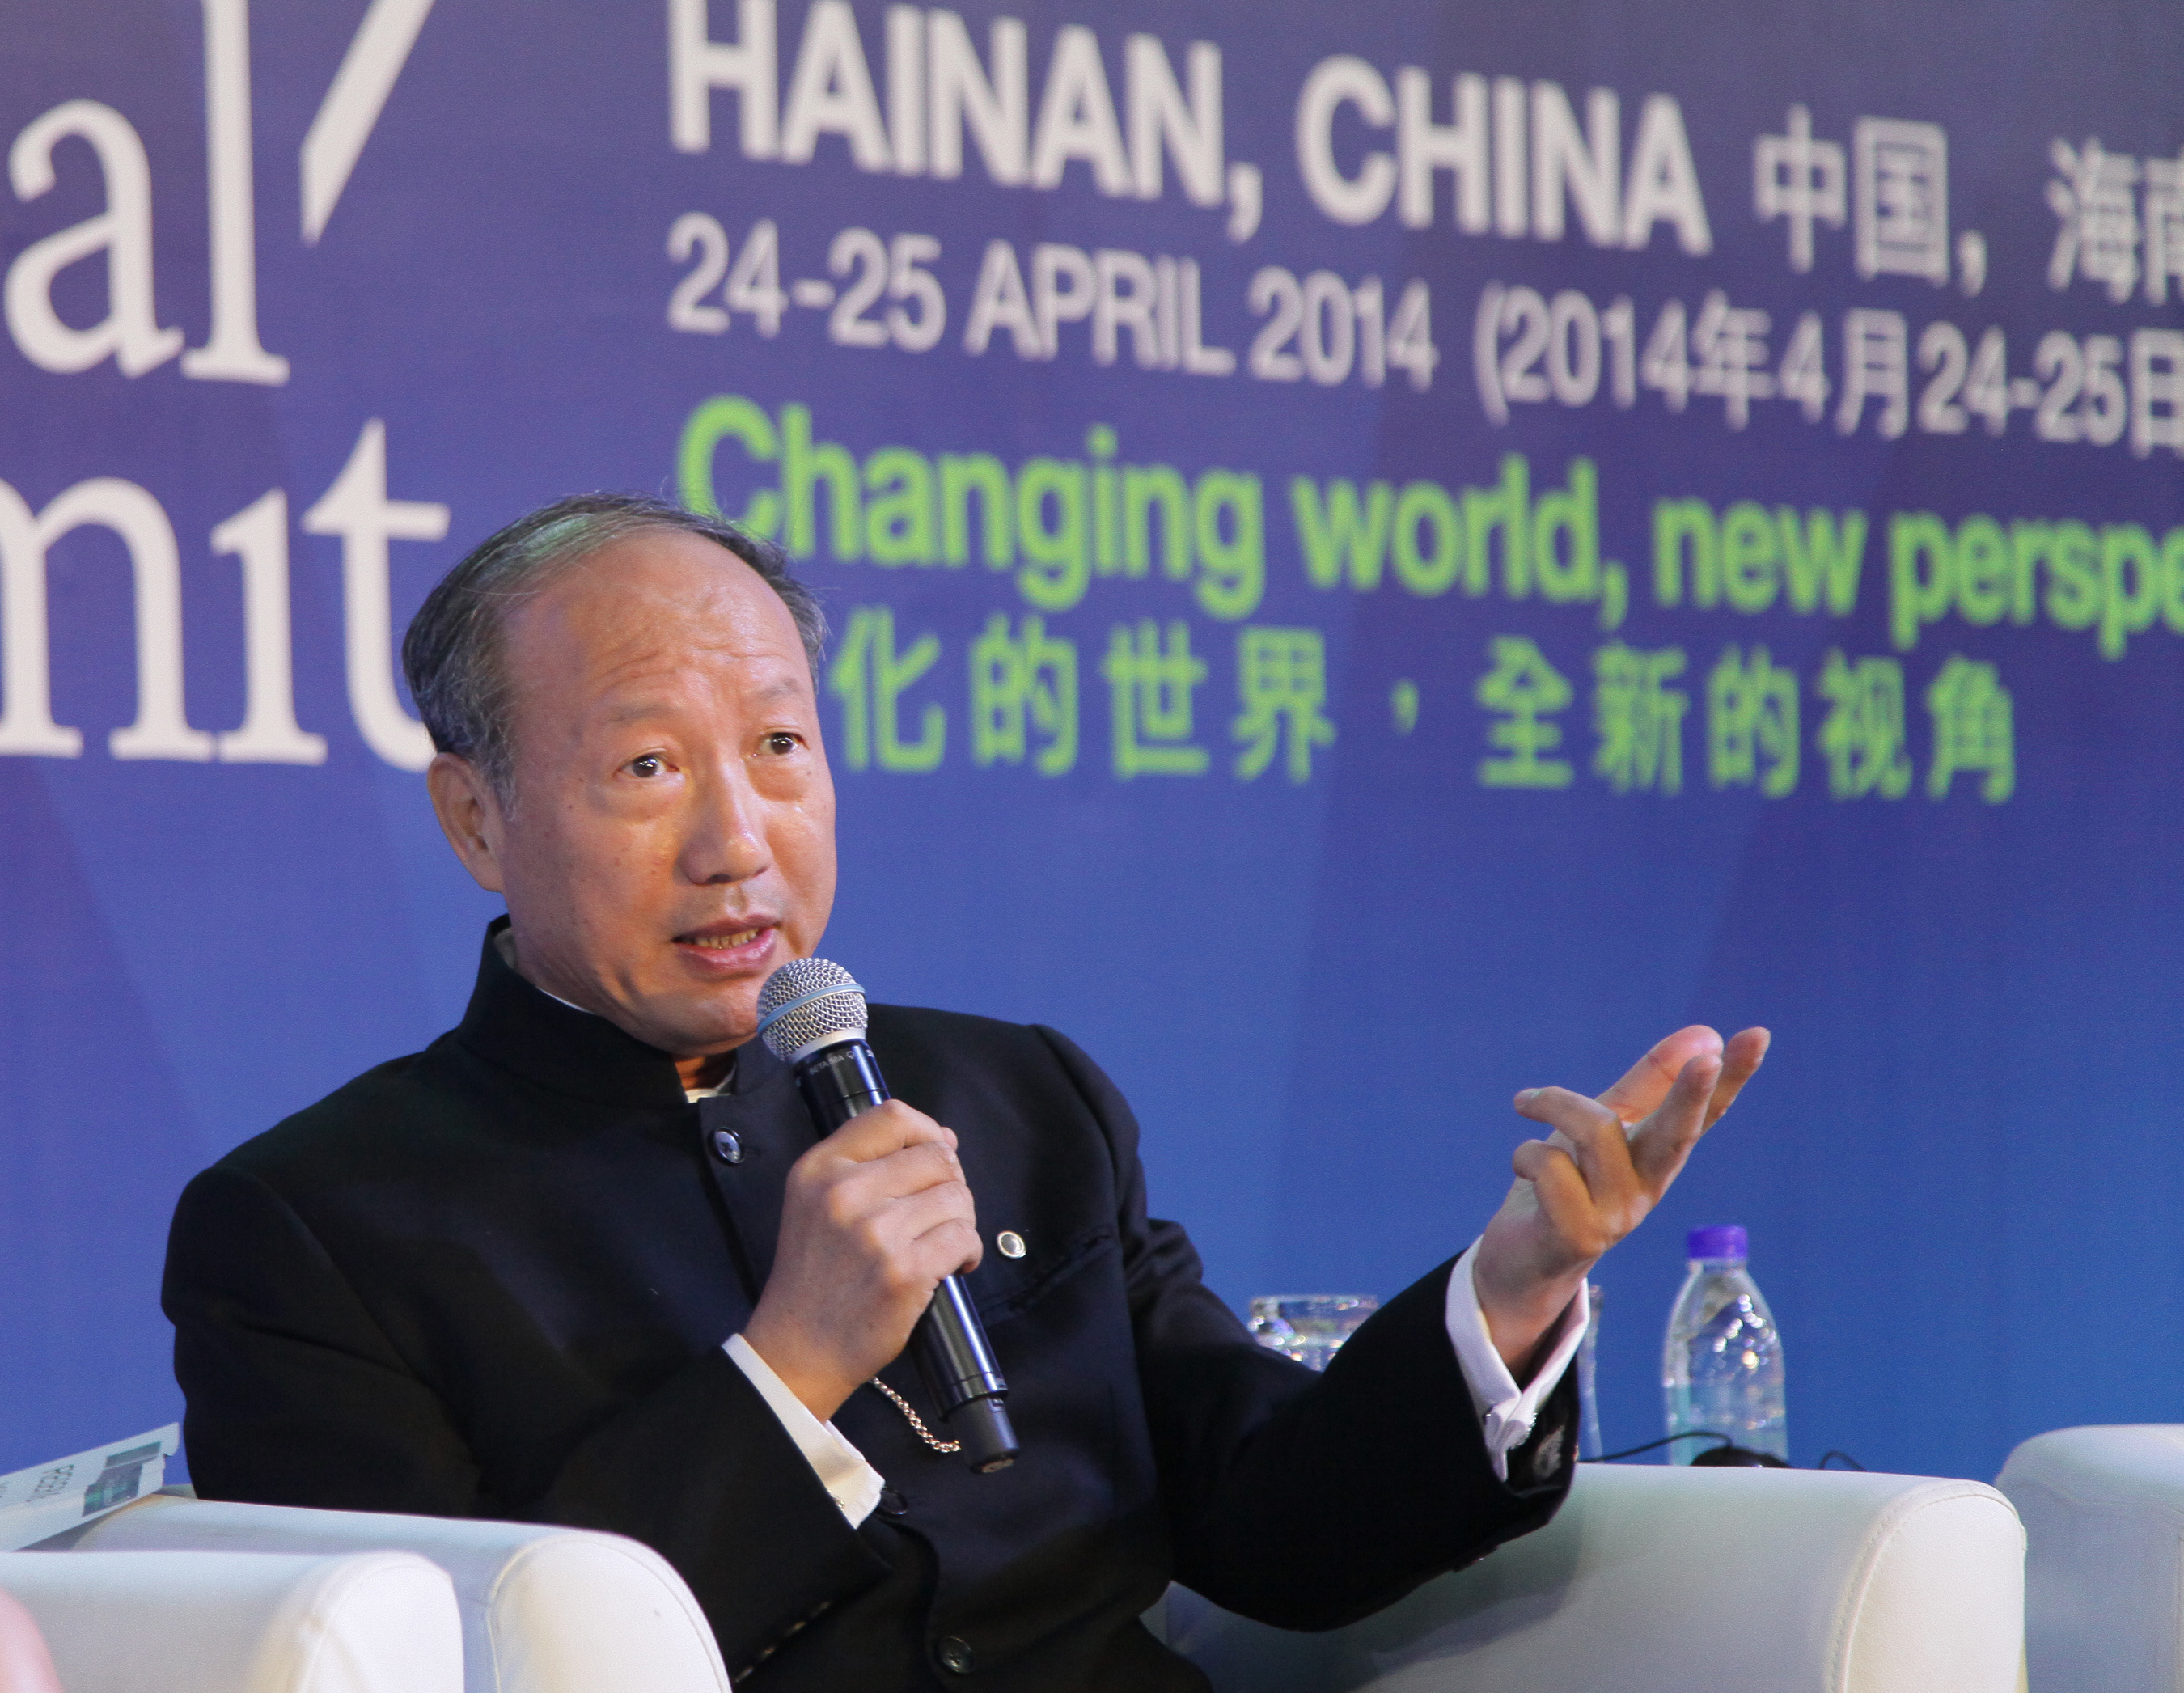 HNA Group Chairman Chen Feng Gives Speech at The 2014 World Travel & Tourism Council (PRNewsFoto/Hainan Airlines Co., LTD)